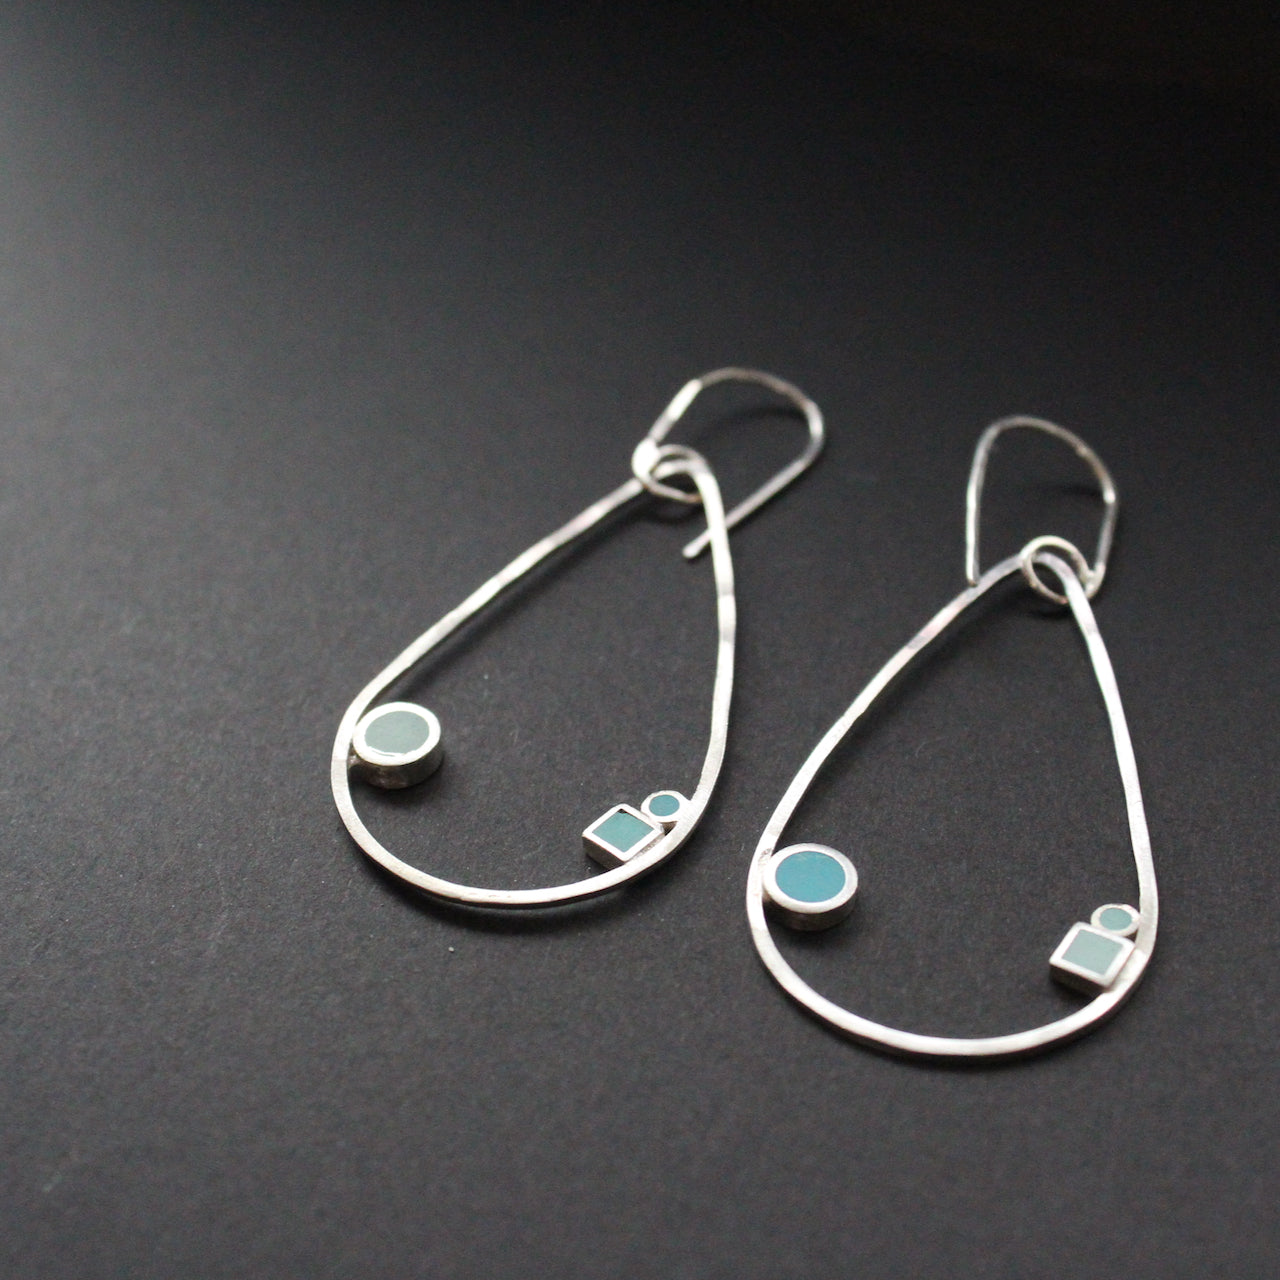 Raindrop shaped drop earrings with round and square dots in turquoise and aqua sitting inside raindrop by artist Clare Lloyd